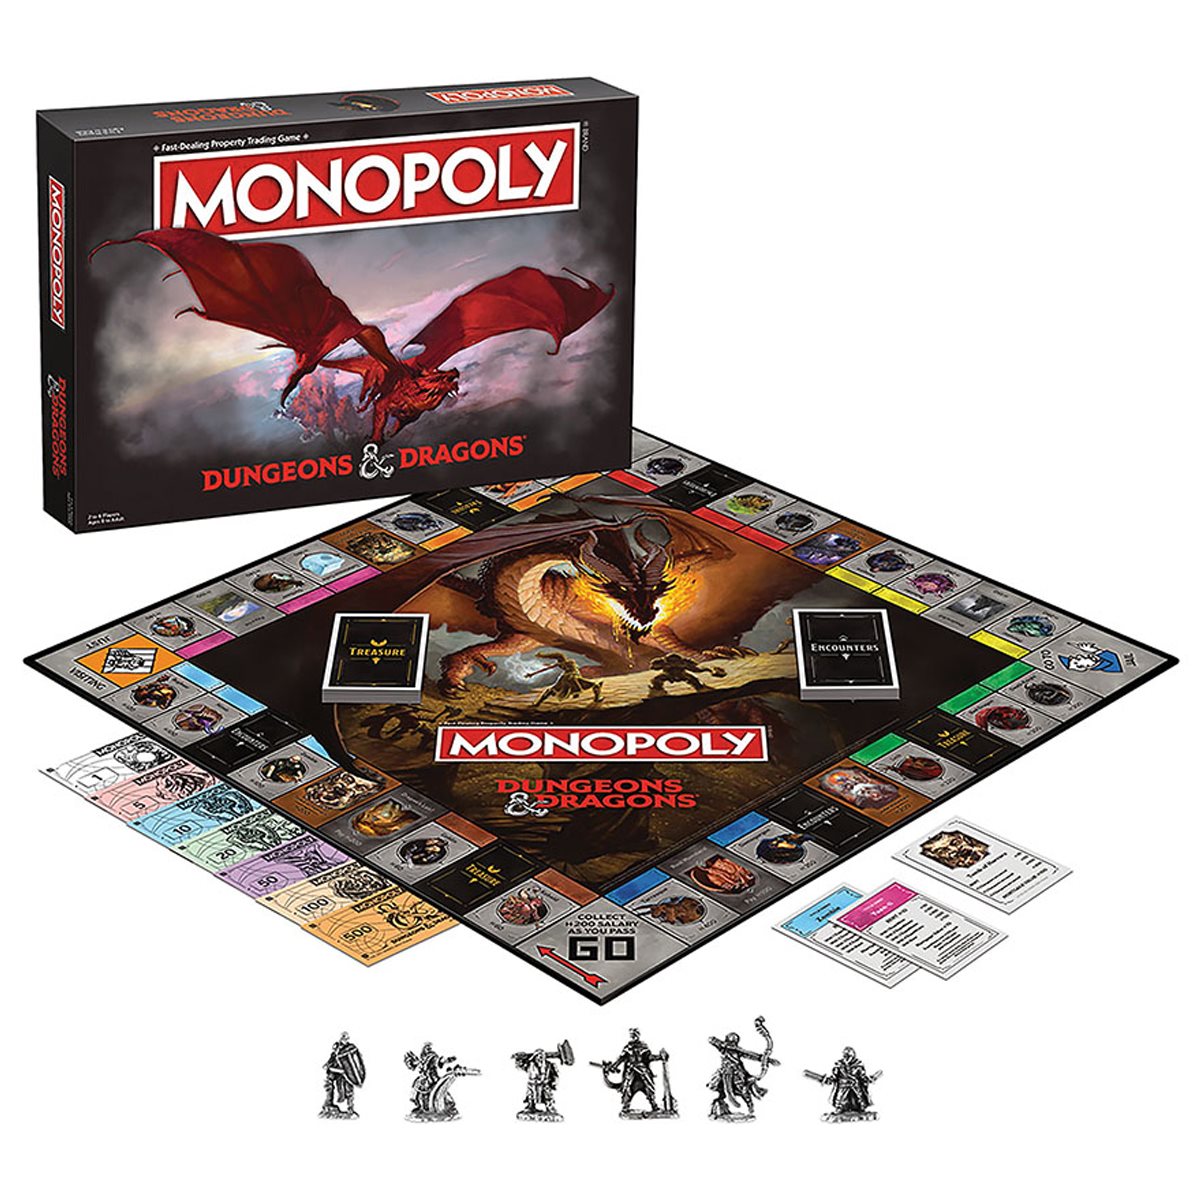 MONOPOLY®: Hello Kitty® & Friends – The Op Games